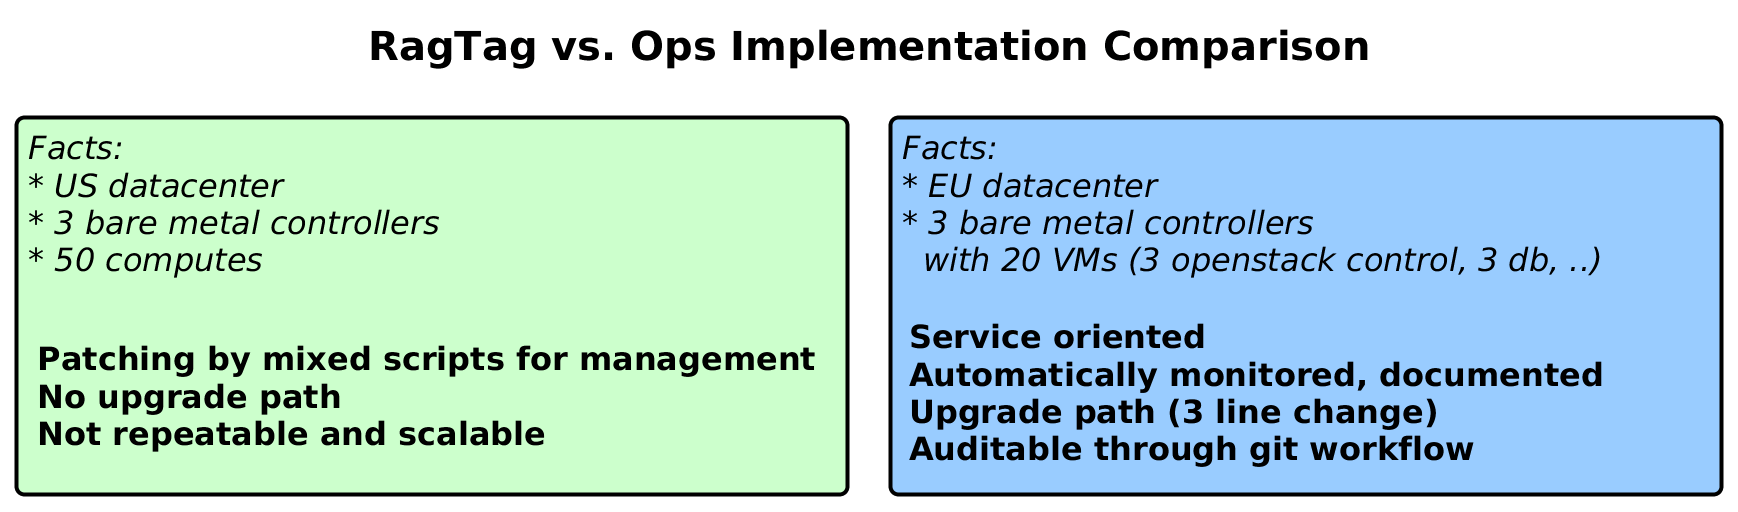 diagram showing RagTag and Ops Implementation comparison